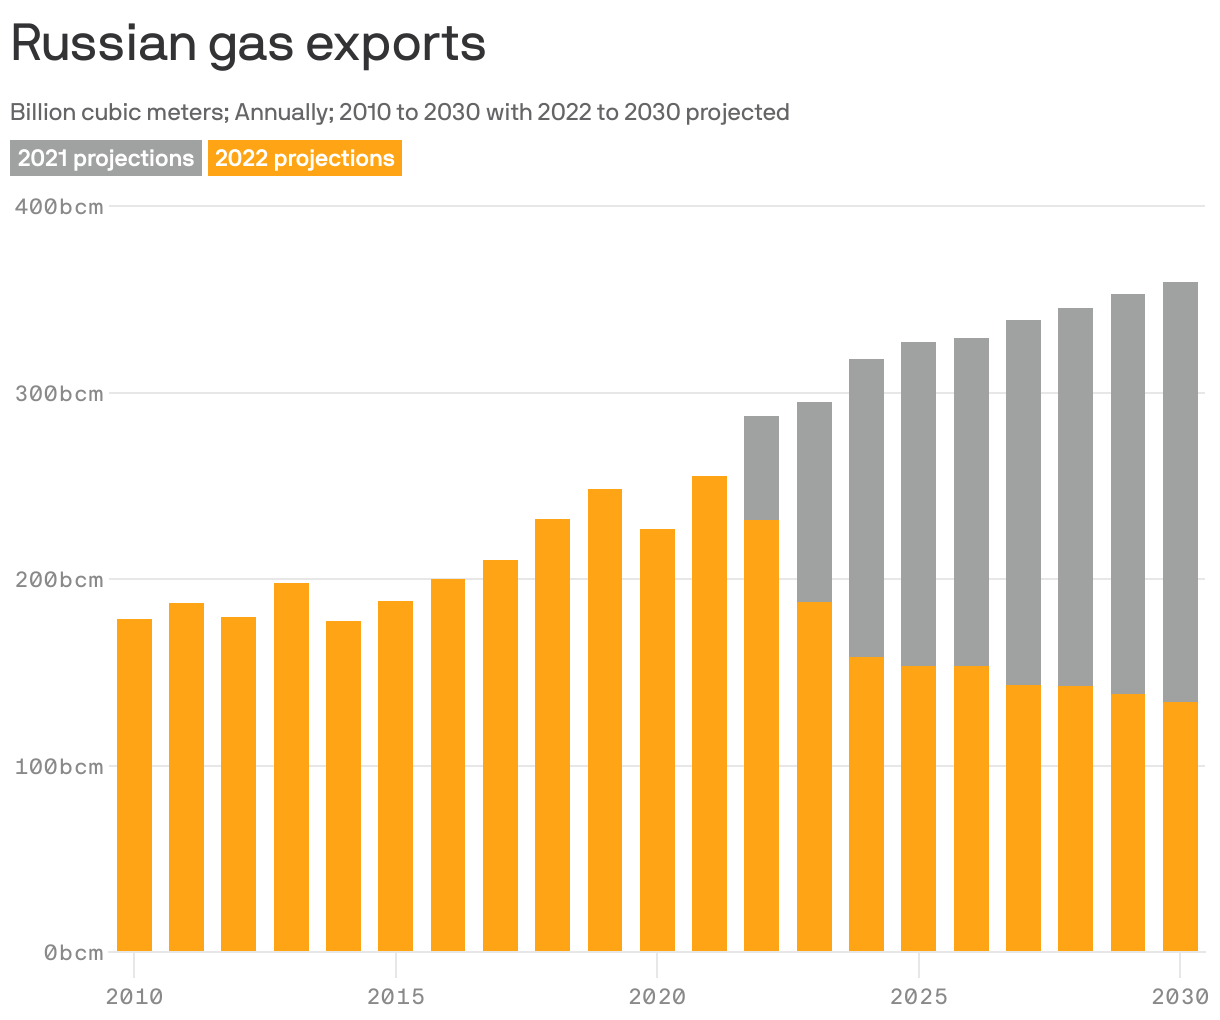 Russian gas exports